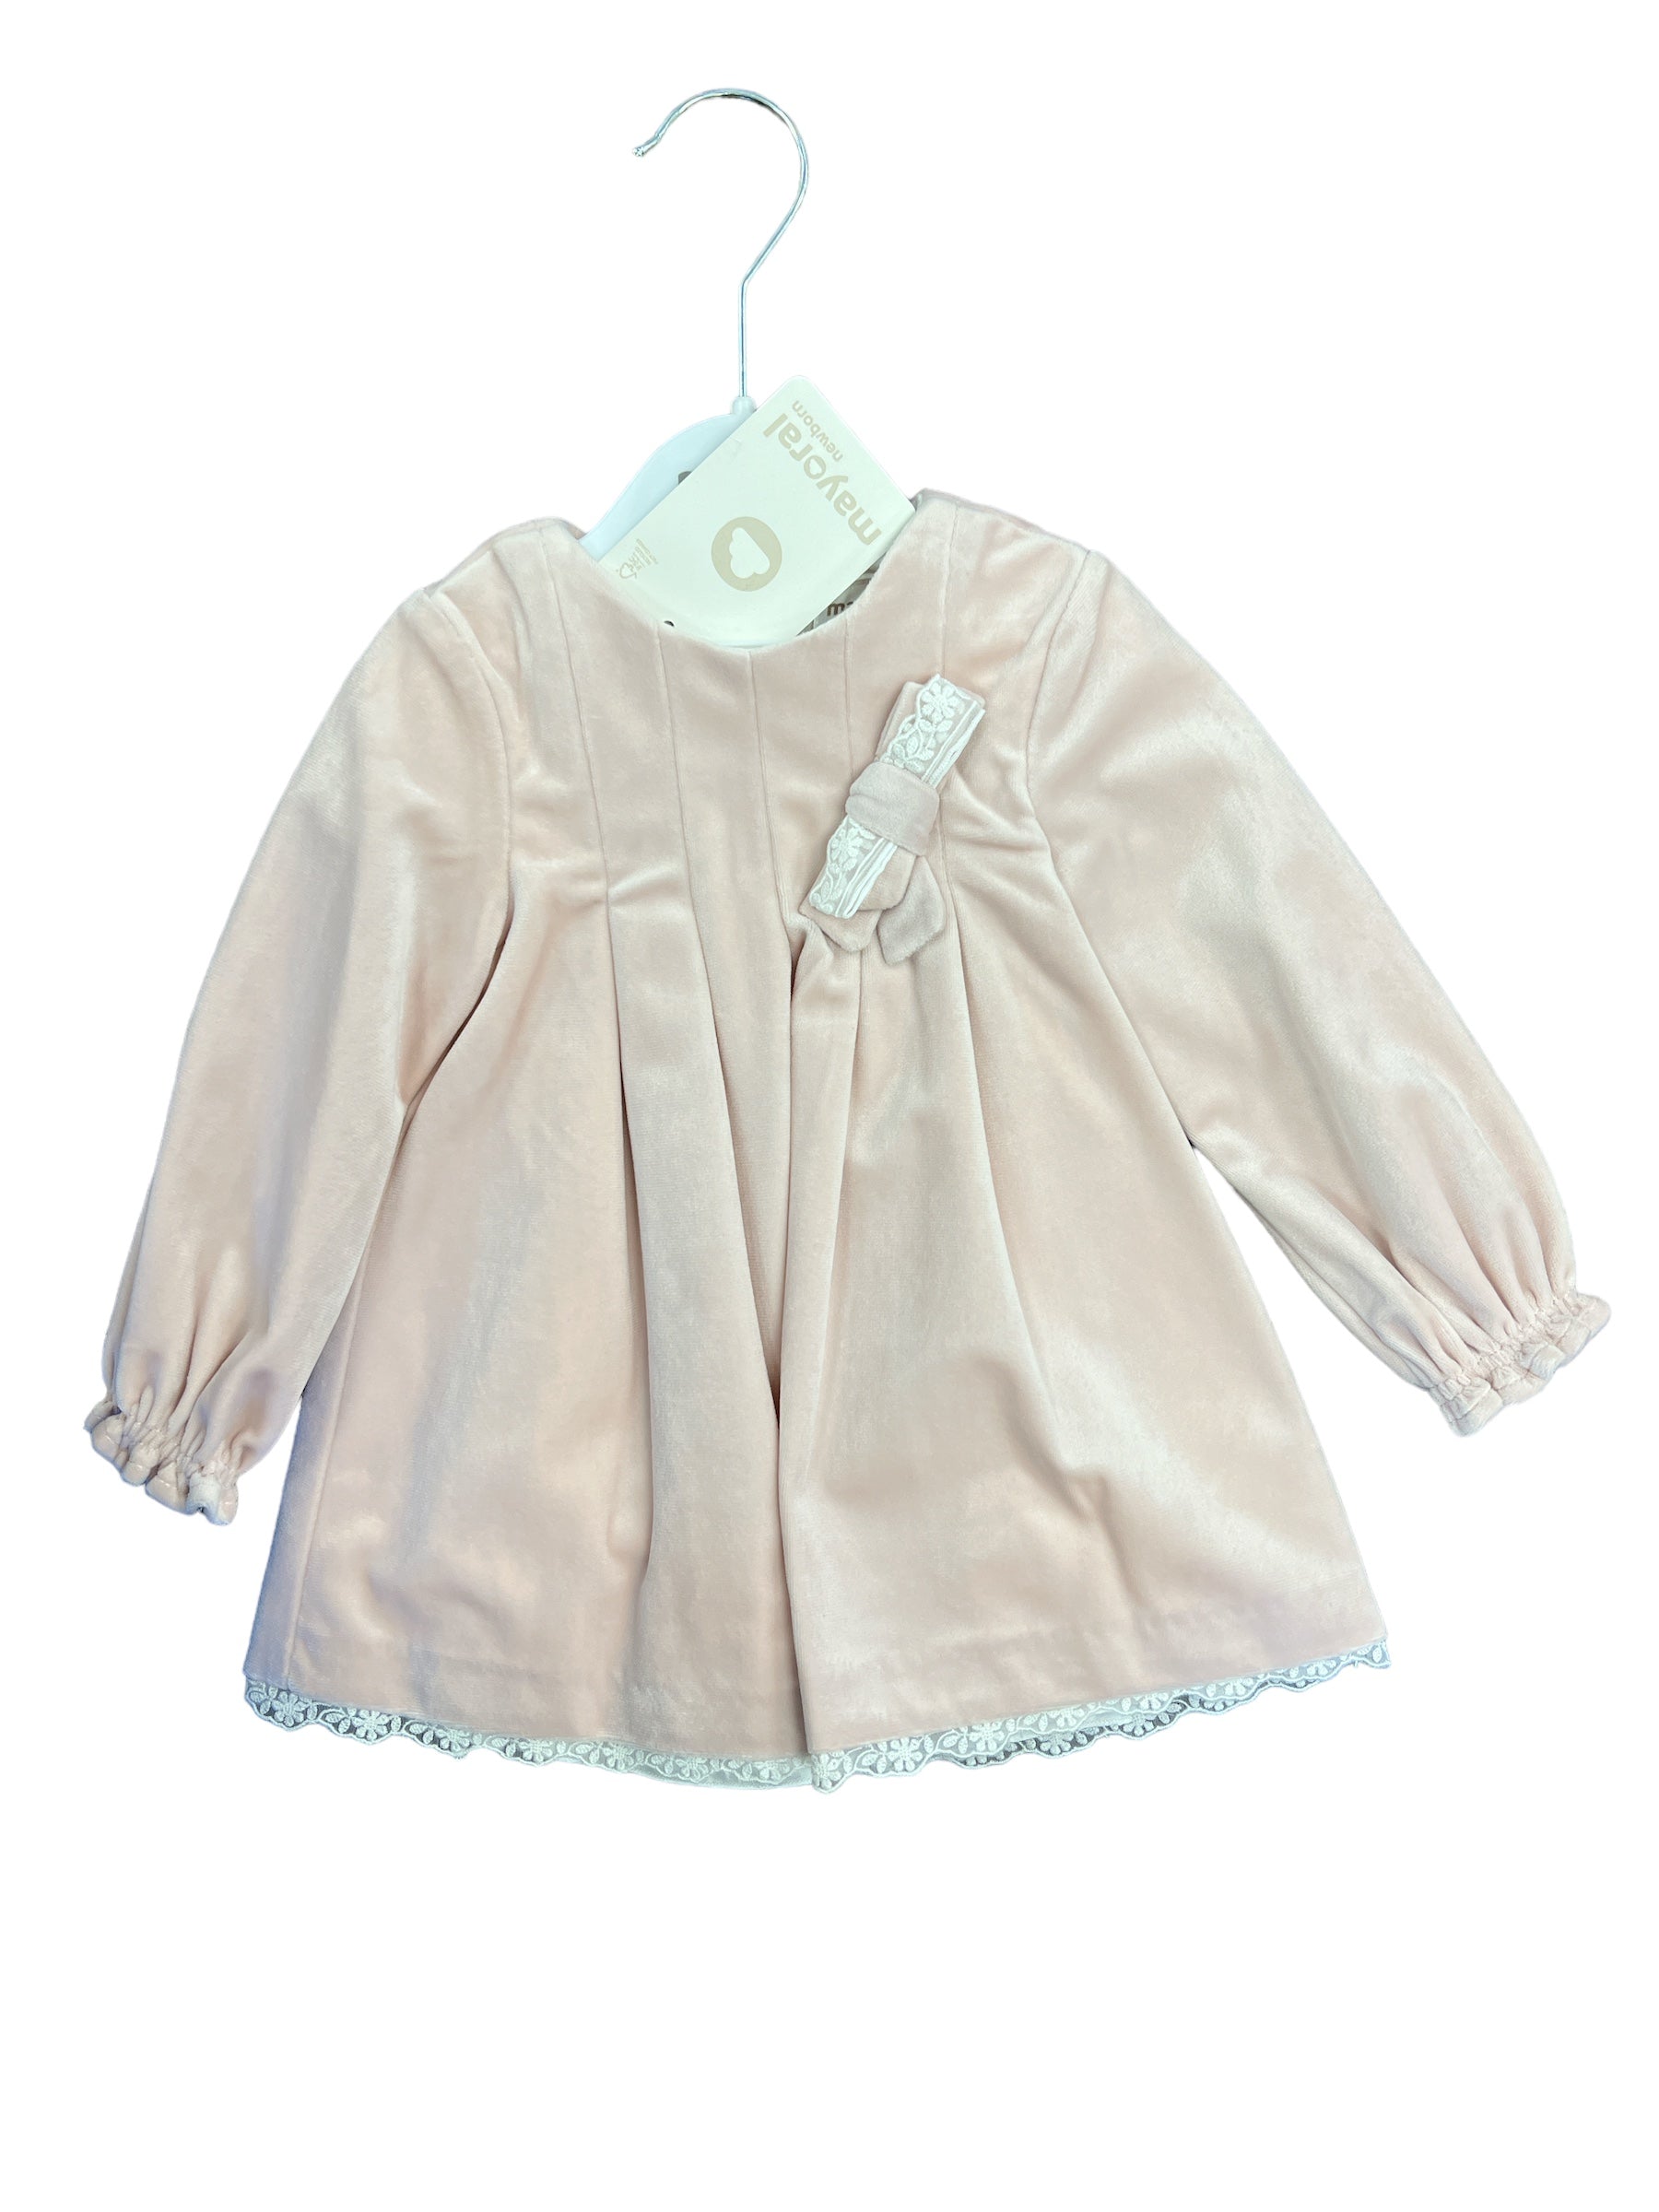 Soft Pink Velvet Dress-520 Baby & Kids Gifts-Simply Stylish Boutique-Simply Stylish Boutique | Women’s & Kid’s Fashion | Paducah, KY